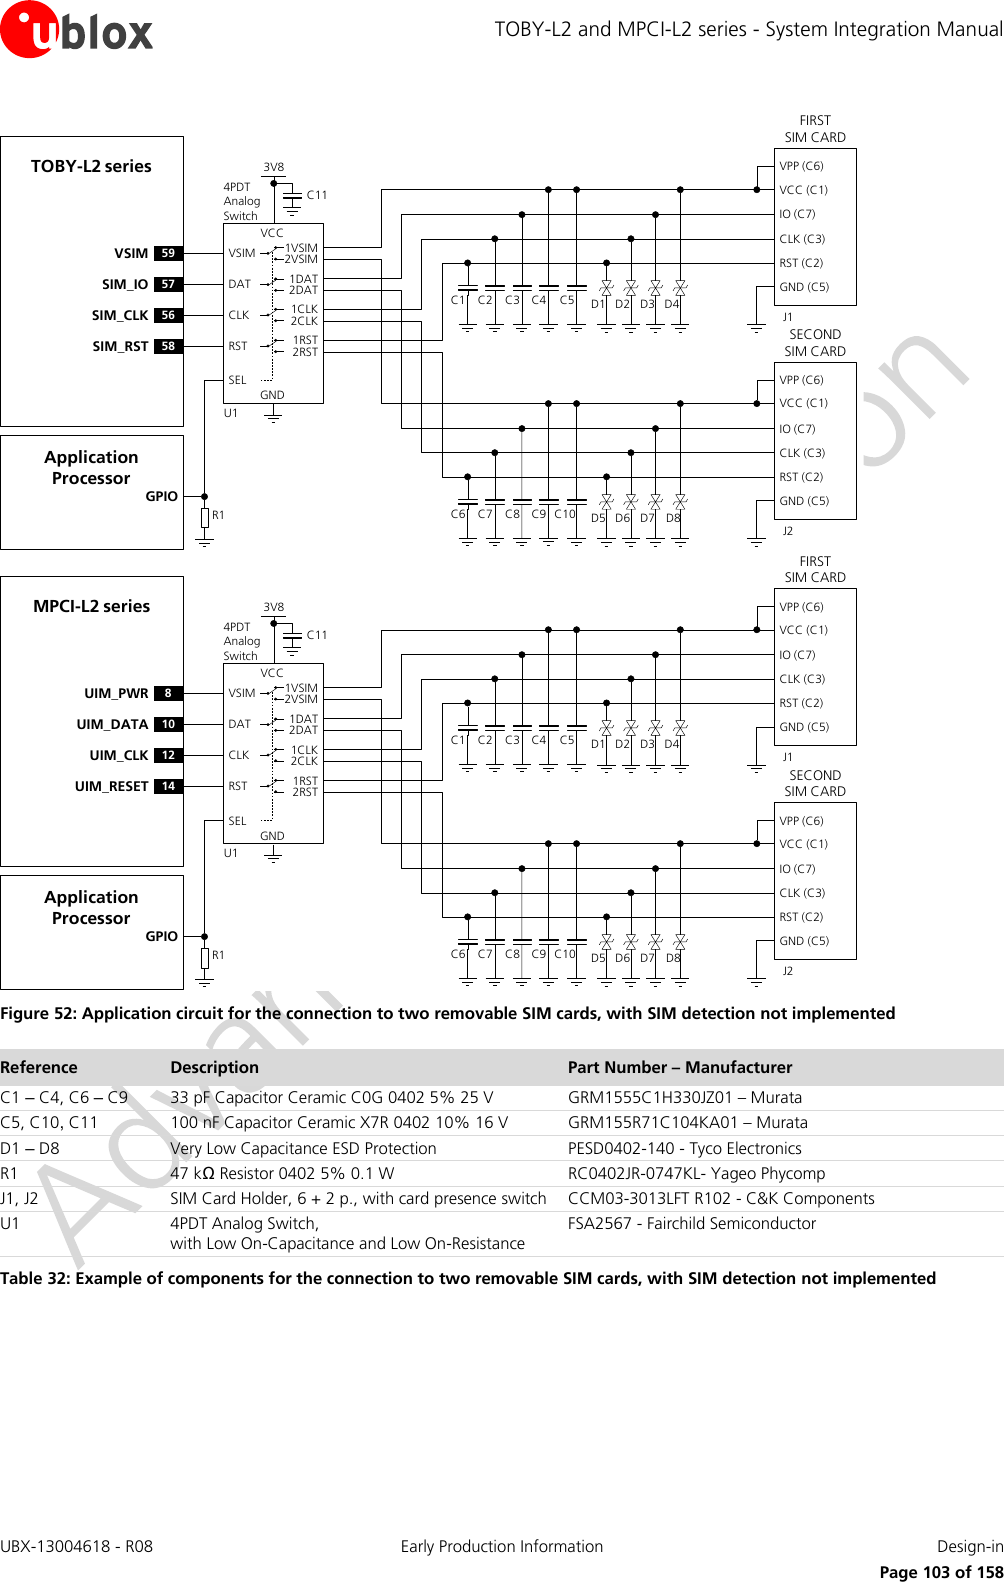 TOBY-L2 and MPCI-L2 series - System Integration Manual UBX-13004618 - R08  Early Production Information  Design-in     Page 103 of 158 TOBY-L2 seriesC1FIRST             SIM CARDVPP (C6)VCC (C1)IO (C7)CLK (C3)RST (C2)GND (C5)C2 C3 C5J1C4 D1 D2 D3 D4GNDU159VSIM VSIM 1VSIM2VSIMVCCC114PDT Analog Switch3V857SIM_IO DAT 1DAT2DAT56SIM_CLK CLK 1CLK2CLK58SIM_RST RST 1RST2RSTSELSECOND   SIM CARDVPP (C6)VCC (C1)IO (C7)CLK (C3)RST (C2)GND (C5)J2C6 C7 C8 C10C9 D5 D6 D7 D8Application ProcessorGPIOR1MPCI-L2 seriesC1FIRST             SIM CARDVPP (C6)VCC (C1)IO (C7)CLK (C3)RST (C2)GND (C5)C2 C3 C5J1C4 D1 D2 D3 D4GNDU18UIM_PWR VSIM 1VSIM2VSIMVCCC114PDT Analog Switch3V810UIM_DATA DAT 1DAT2DAT12UIM_CLK CLK 1CLK2CLK14UIM_RESET RST 1RST2RSTSELSECOND   SIM CARDVPP (C6)VCC (C1)IO (C7)CLK (C3)RST (C2)GND (C5)J2C6 C7 C8 C10C9 D5 D6 D7 D8Application ProcessorGPIOR1 Figure 52: Application circuit for the connection to two removable SIM cards, with SIM detection not implemented Reference Description Part Number – Manufacturer C1 – C4, C6 – C9 33 pF Capacitor Ceramic C0G 0402 5% 25 V GRM1555C1H330JZ01 – Murata C5, C10, C11 100 nF Capacitor Ceramic X7R 0402 10% 16 V GRM155R71C104KA01 – Murata D1 – D8 Very Low Capacitance ESD Protection PESD0402-140 - Tyco Electronics  R1 47 kΩ Resistor 0402 5% 0.1 W RC0402JR-0747KL- Yageo Phycomp J1, J2 SIM Card Holder, 6 + 2 p., with card presence switch CCM03-3013LFT R102 - C&amp;K Components U1 4PDT Analog Switch,  with Low On-Capacitance and Low On-Resistance FSA2567 - Fairchild Semiconductor Table 32: Example of components for the connection to two removable SIM cards, with SIM detection not implemented  